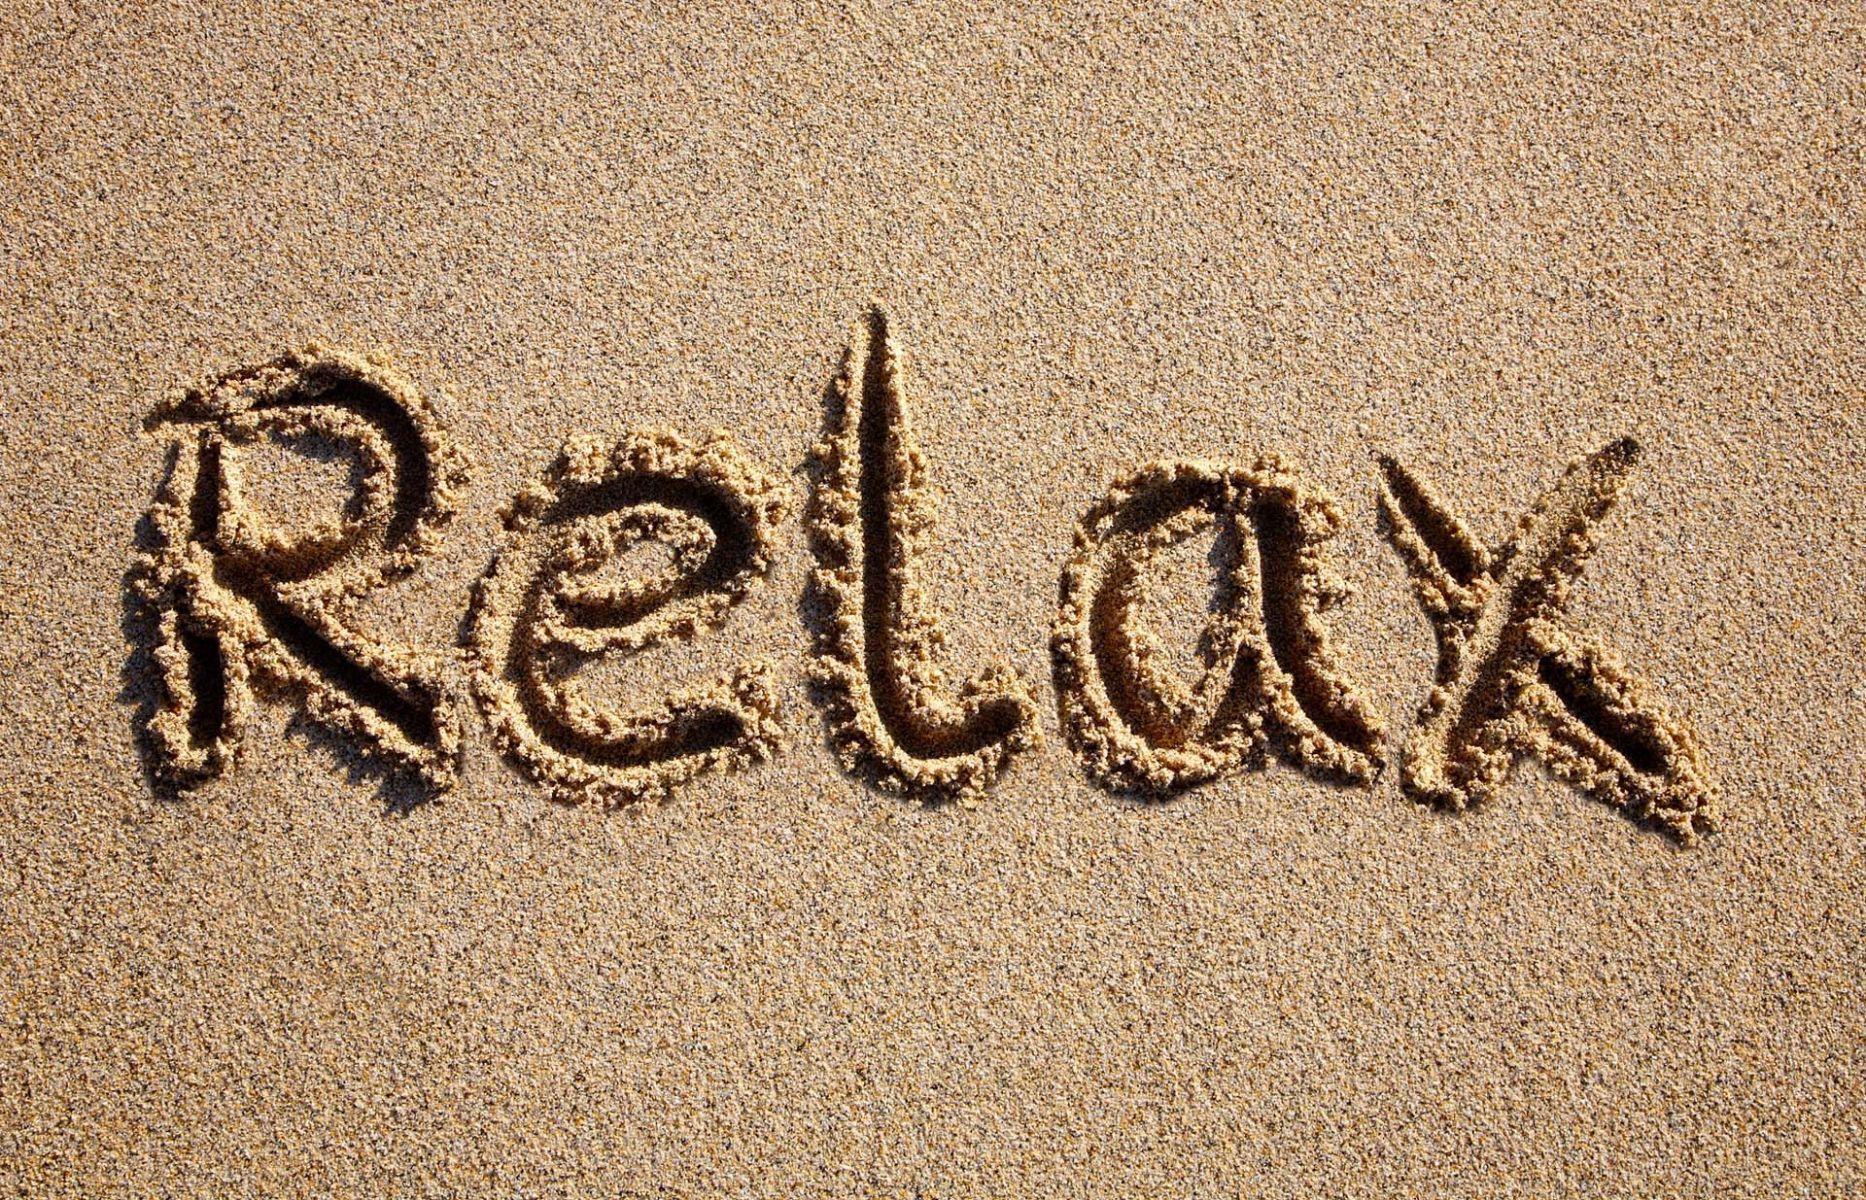 Relax Take It Easy. HD Motivation Wallpaper for Mobile and Desktop